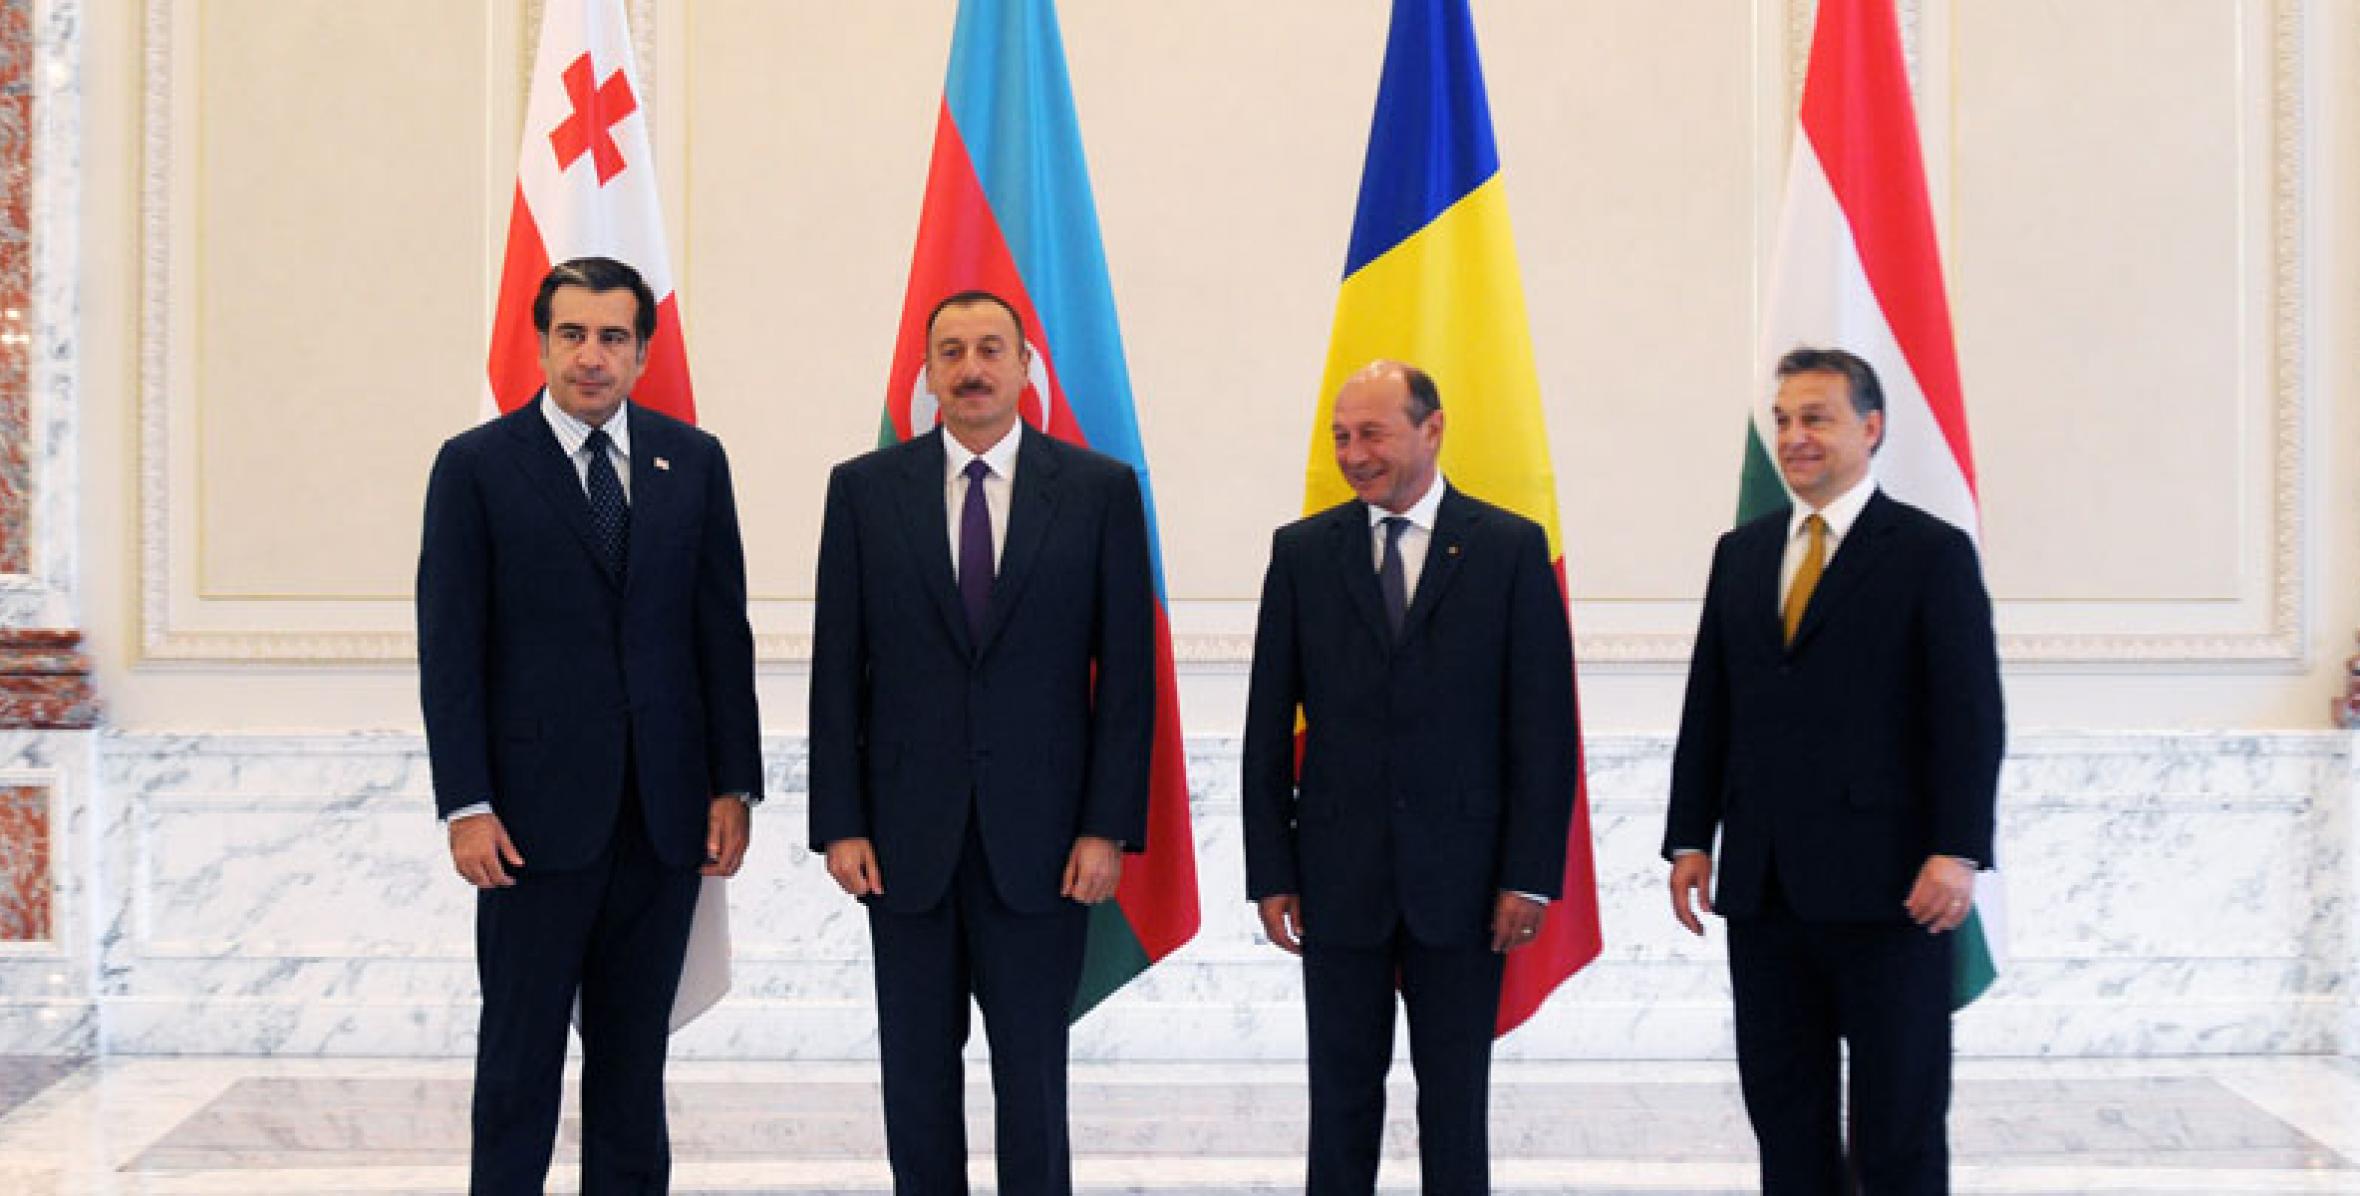 Meeting held between the heads of state and government of Azerbaijan, Georgia, Romania and Hungary